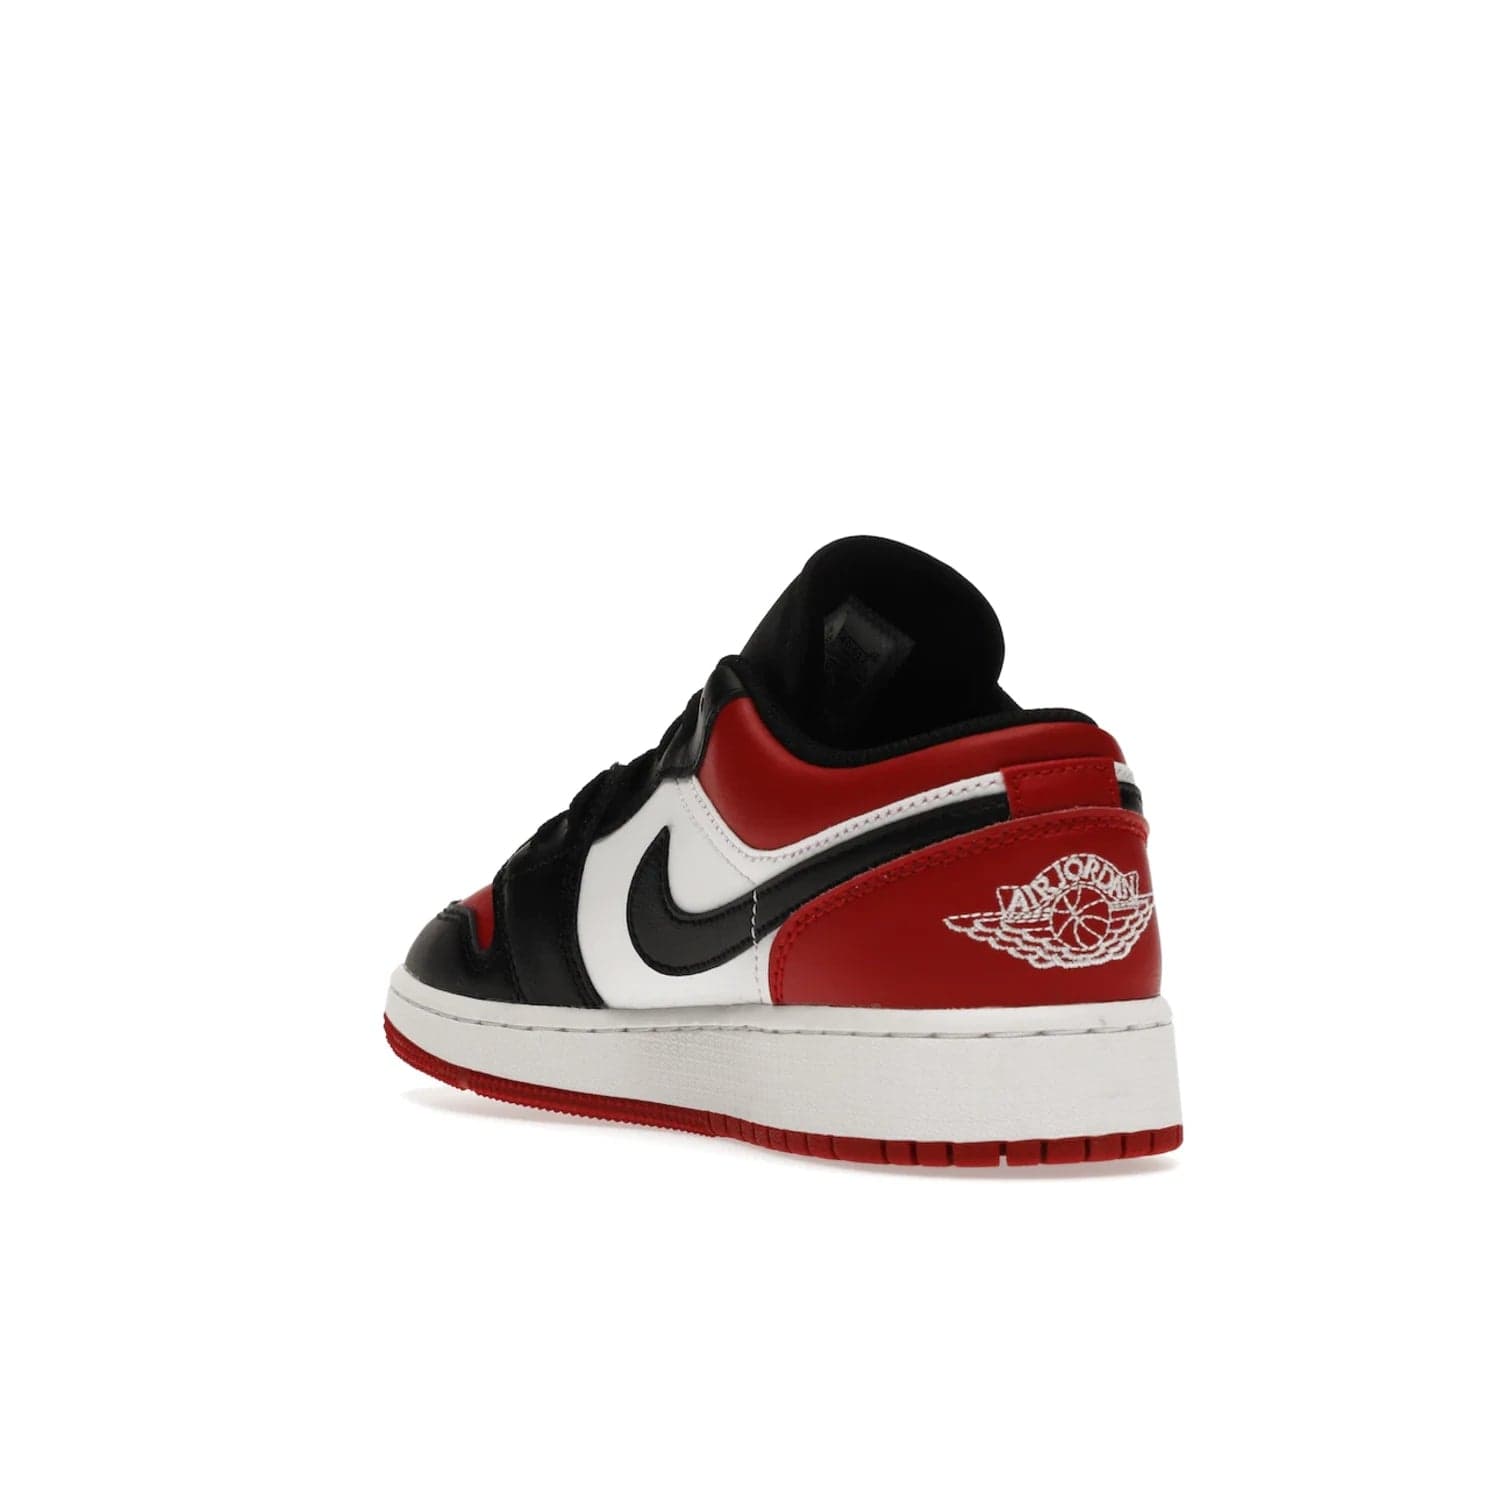 Jordan 1 Low Bred Toe (GS) - Image 25 - Only at www.BallersClubKickz.com - #
Iconic sneaker from Jordan brand with classic colorway, unique detailing & Air Jordan Wings logo. Step into the shoes of the greats with the Jordan 1 Low Bred Toe GS!